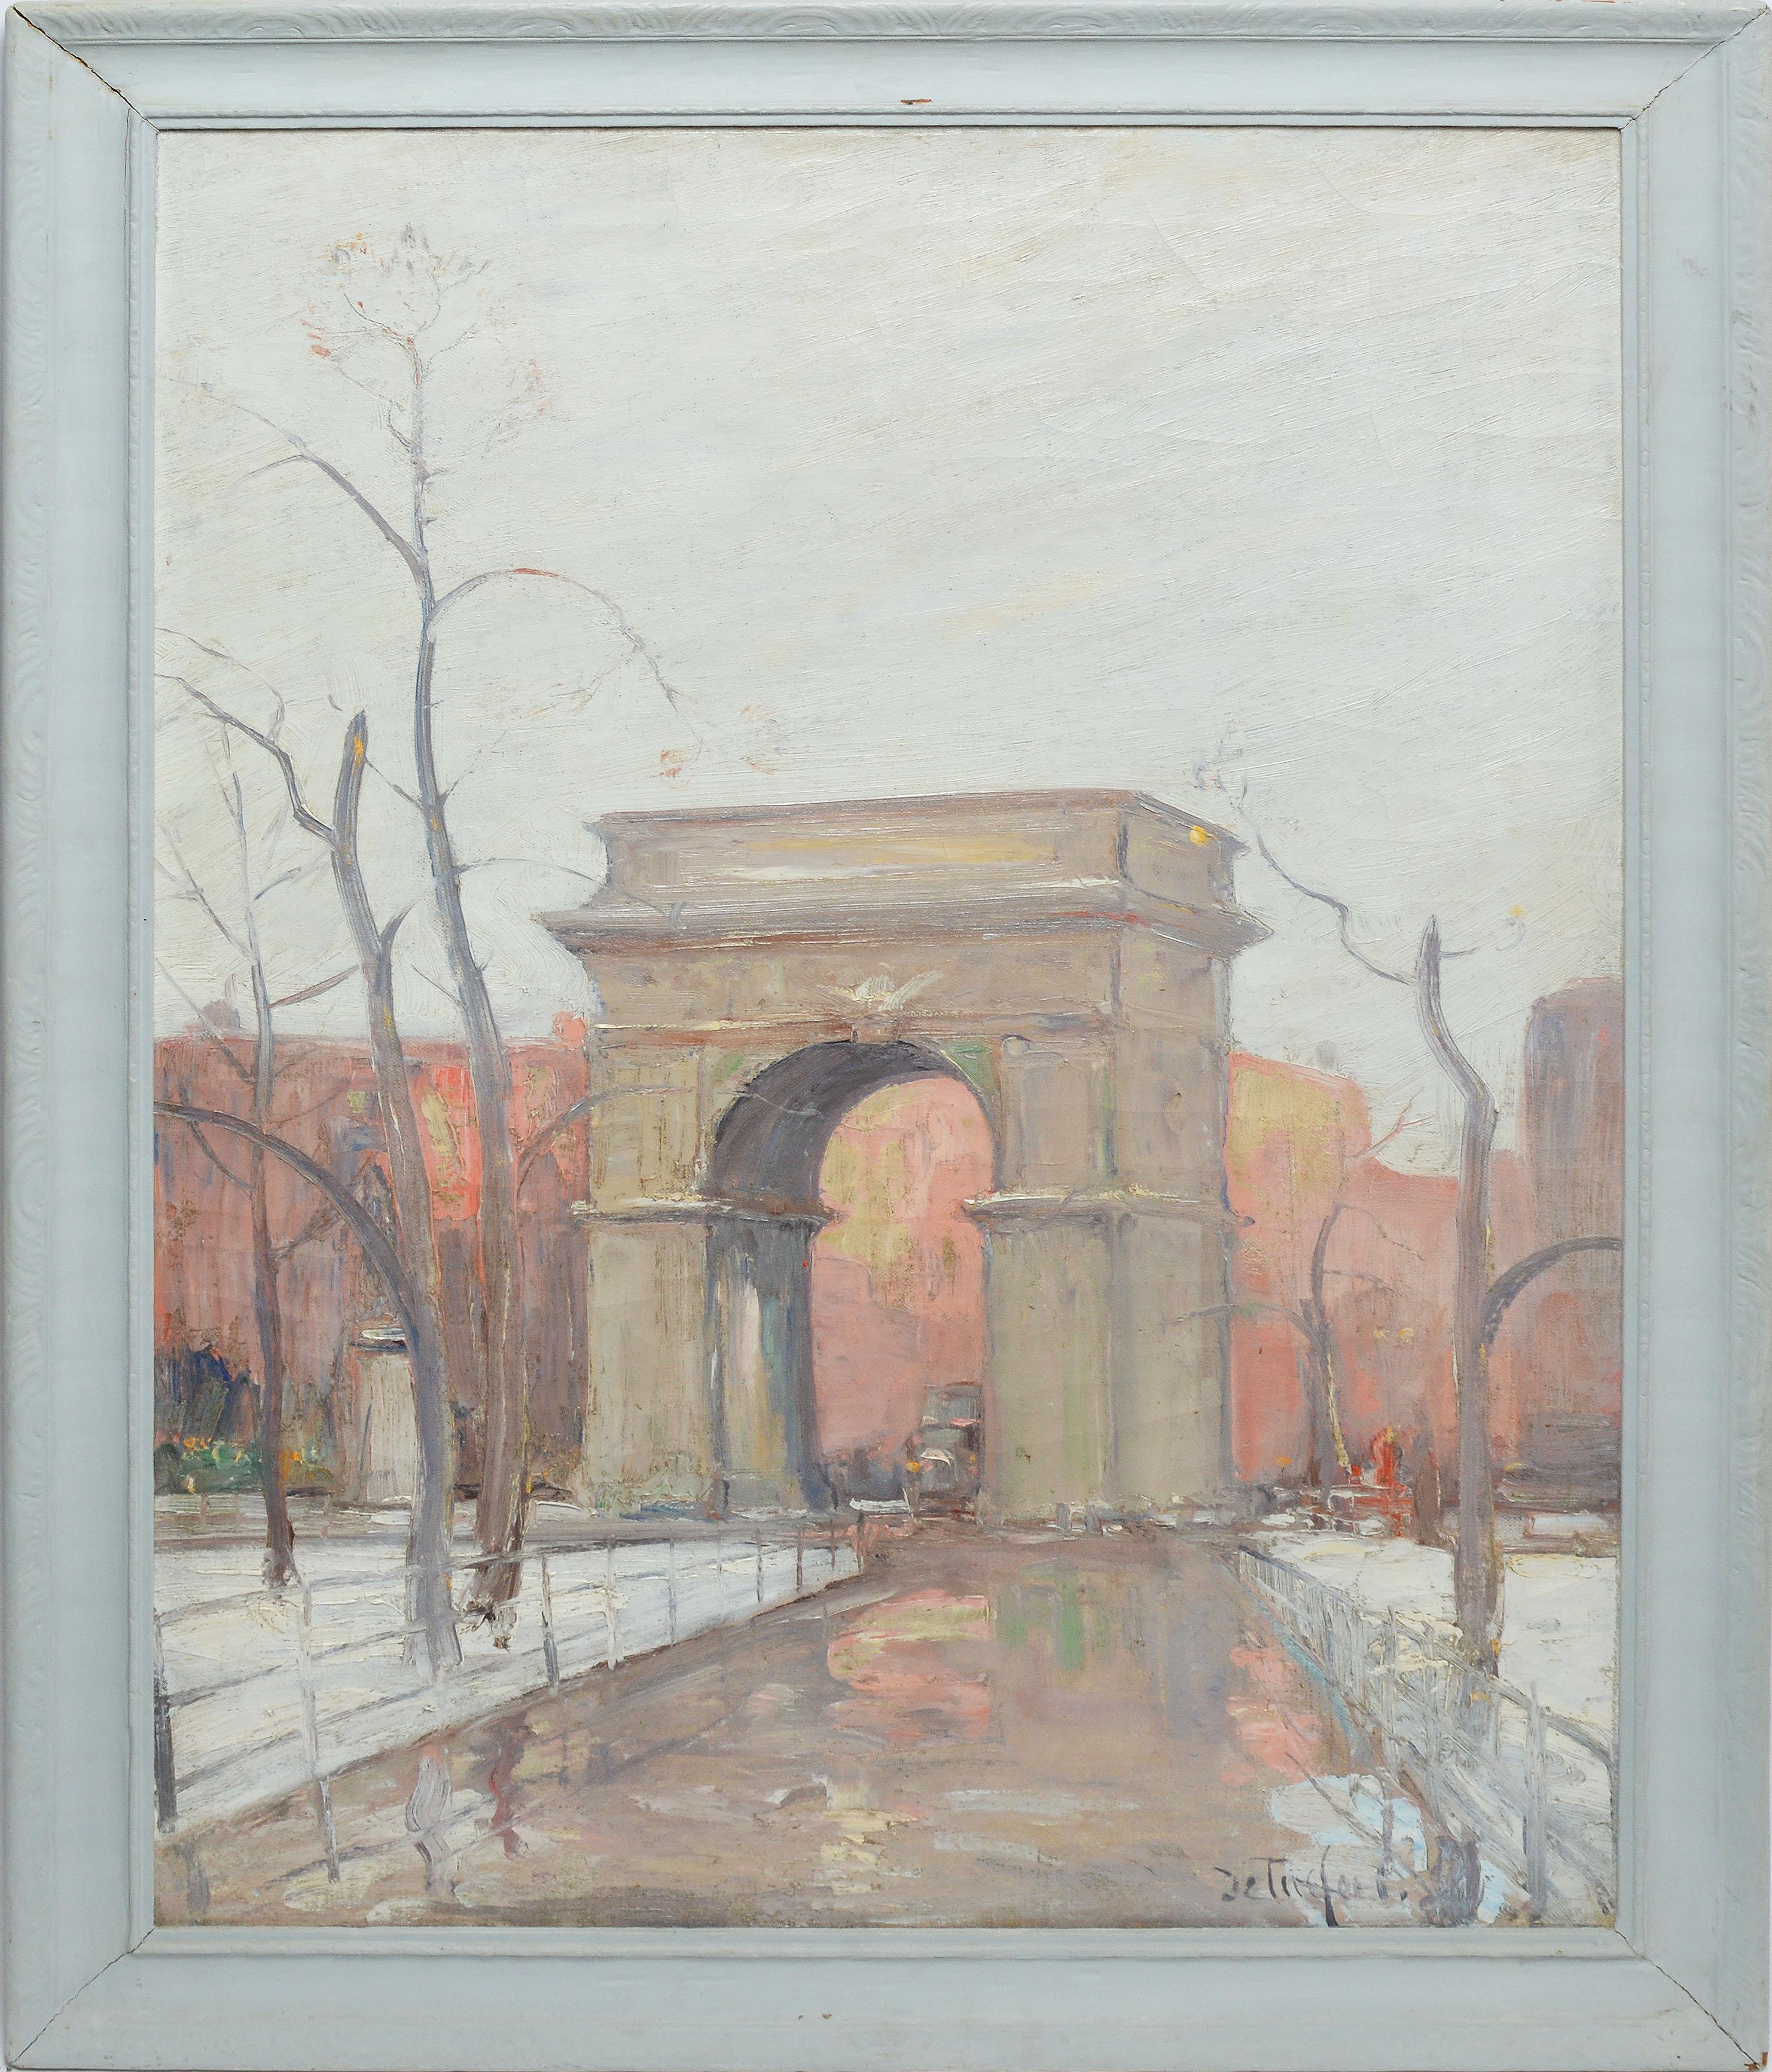 Impressionist oil painting of Washington Square Park in New York City by Bela DeTirefort (1894-1993). Oil on canvas, circa 1925. Signed "DeTirefort" lower left. Displayed in a period white impressionist frame.  Image, 20"L x 28"H, overall 24"L x